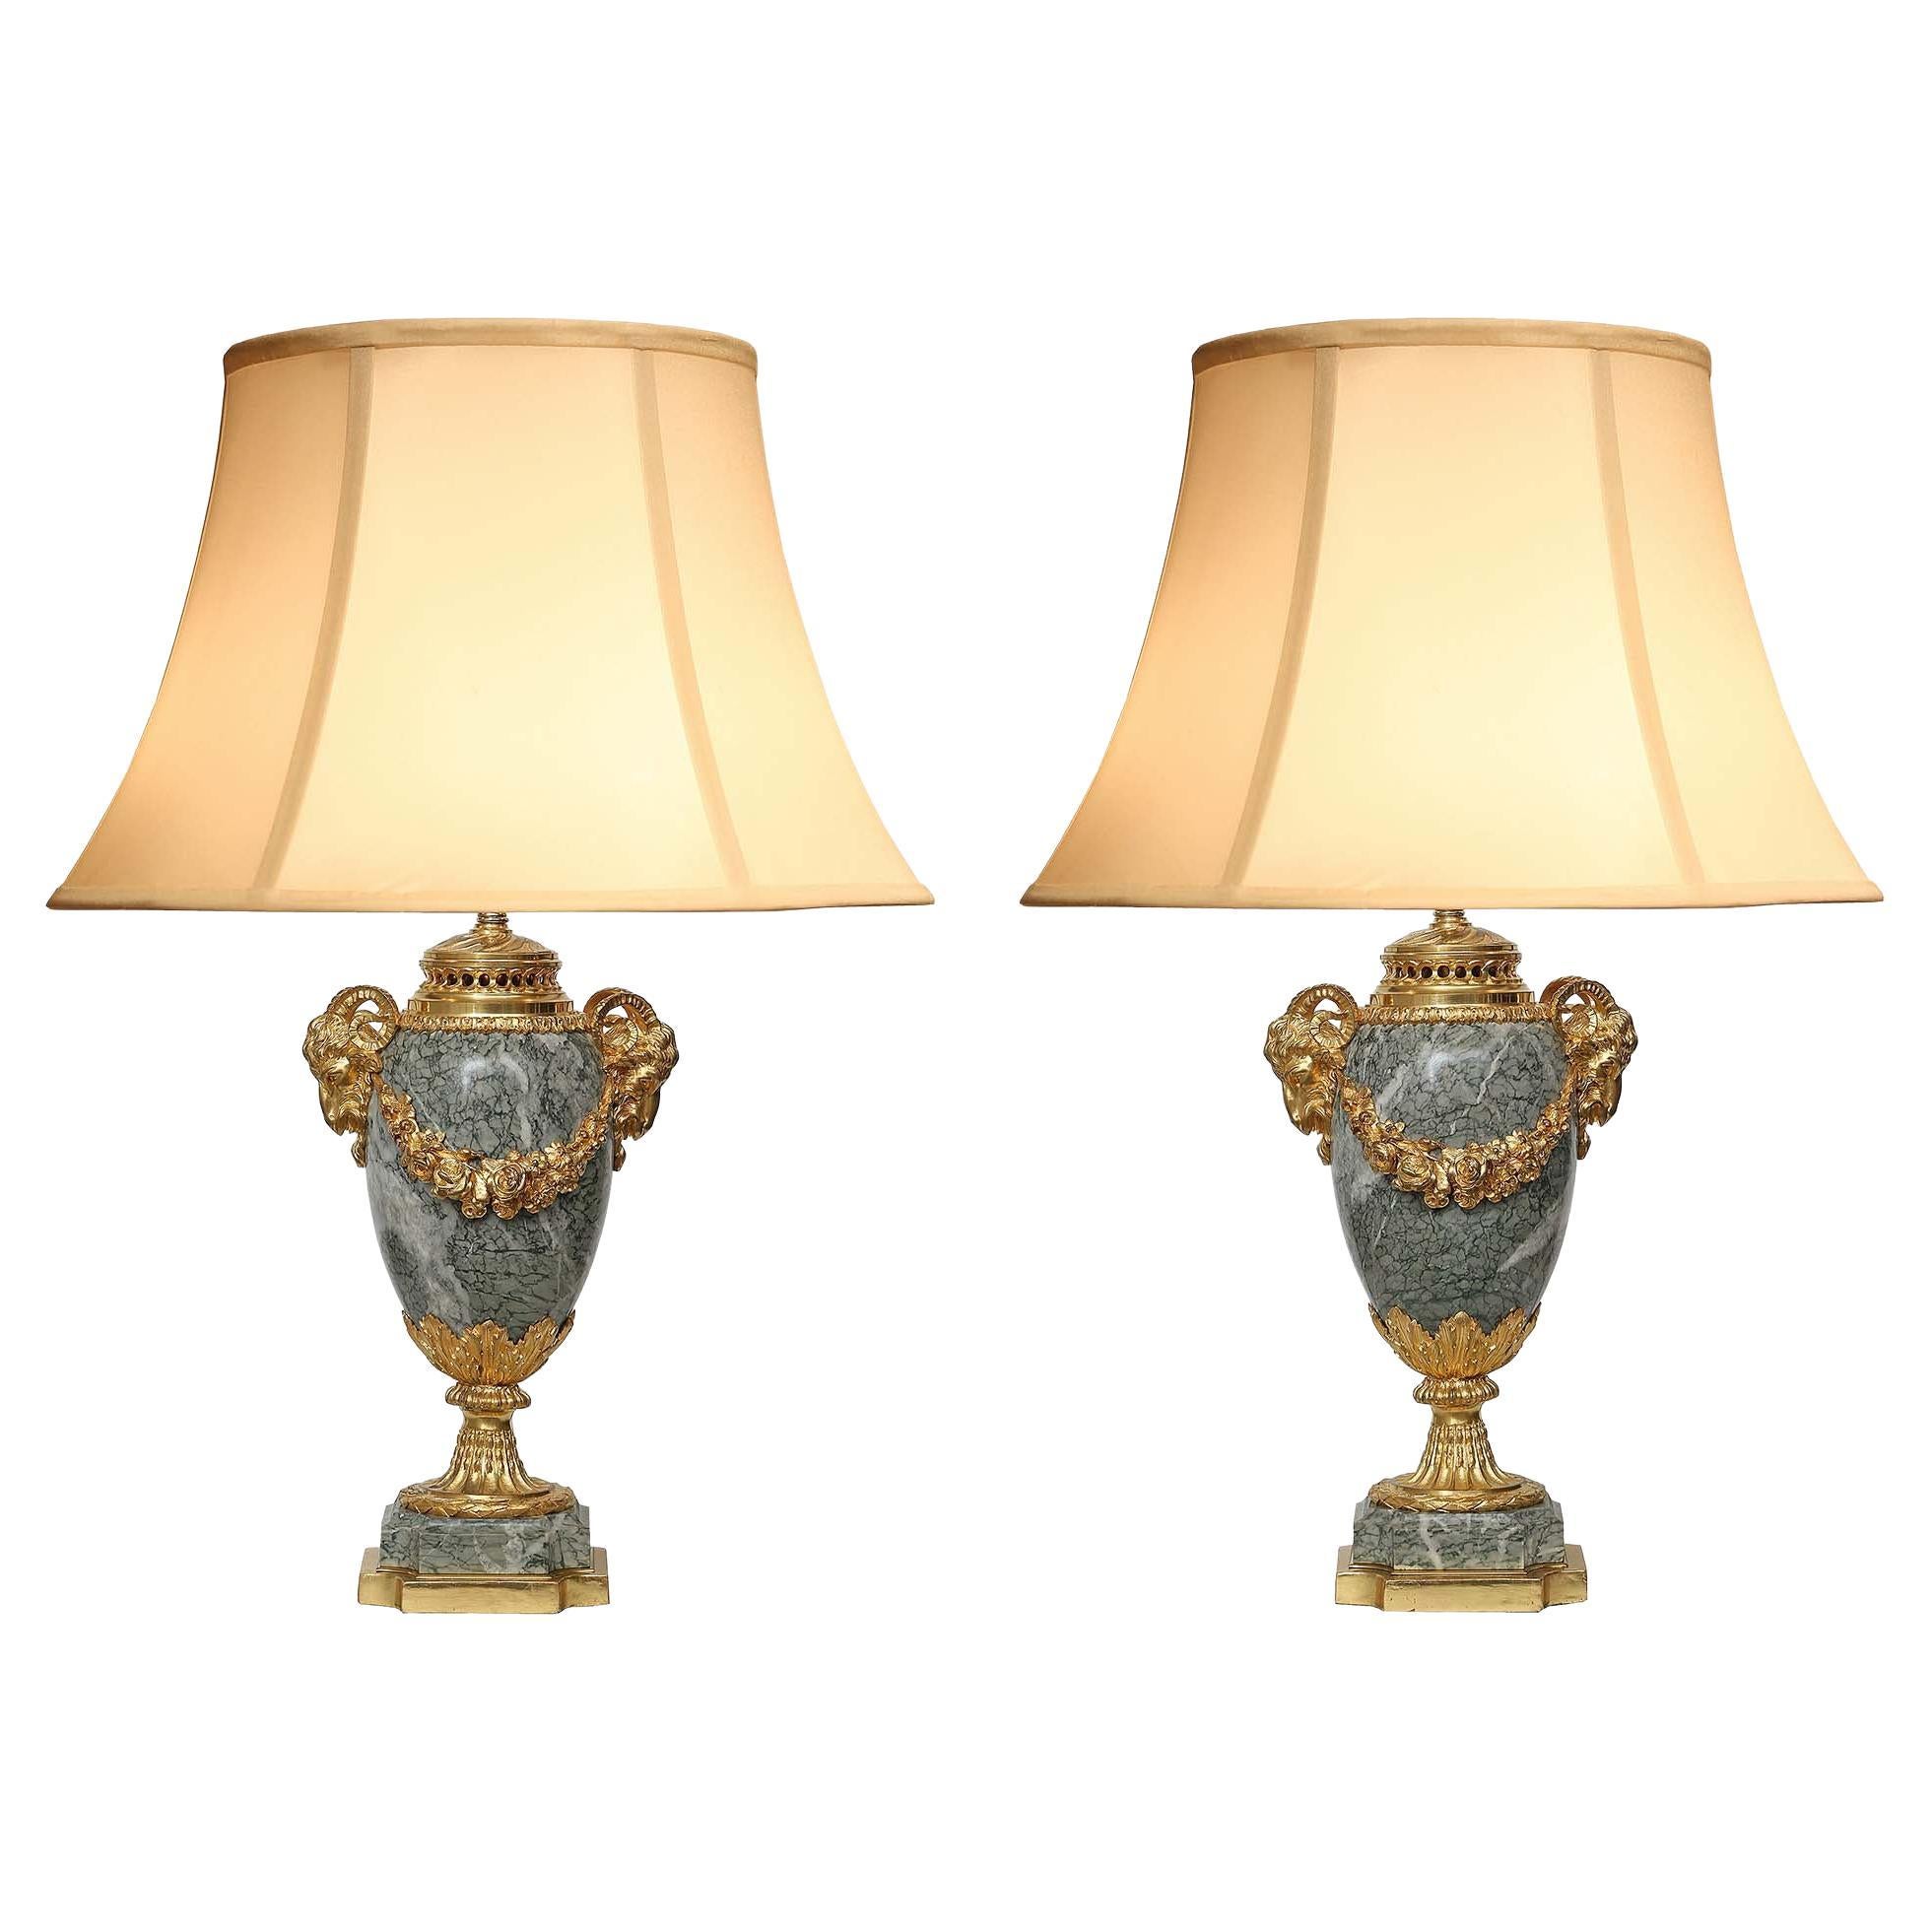 Pair of French 19th Century Louis XVI Style Ormolu and Marble Lamps For Sale